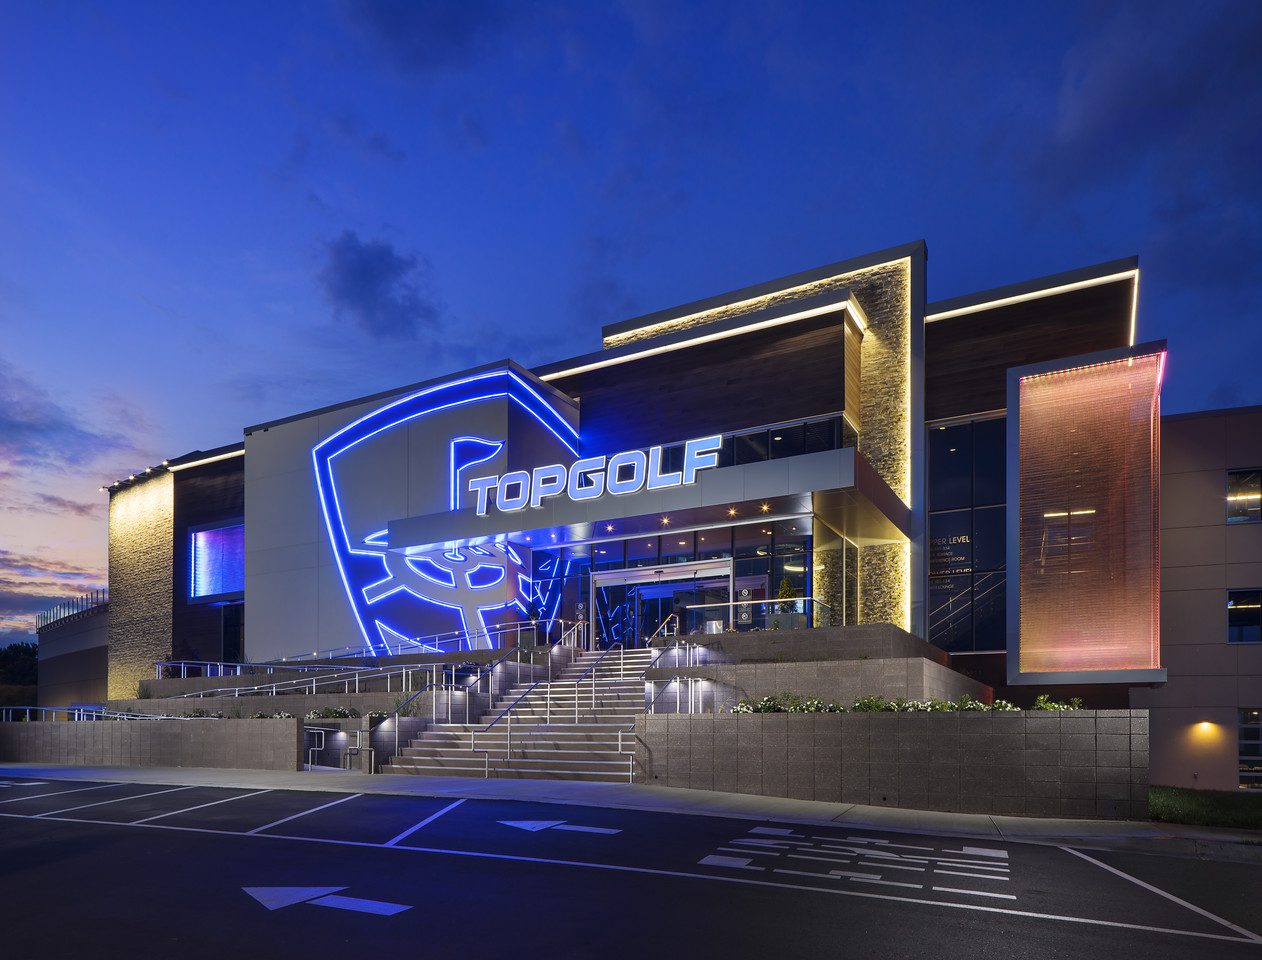 Digital Place Based Advertising Association Welcomes New Member Topgolf